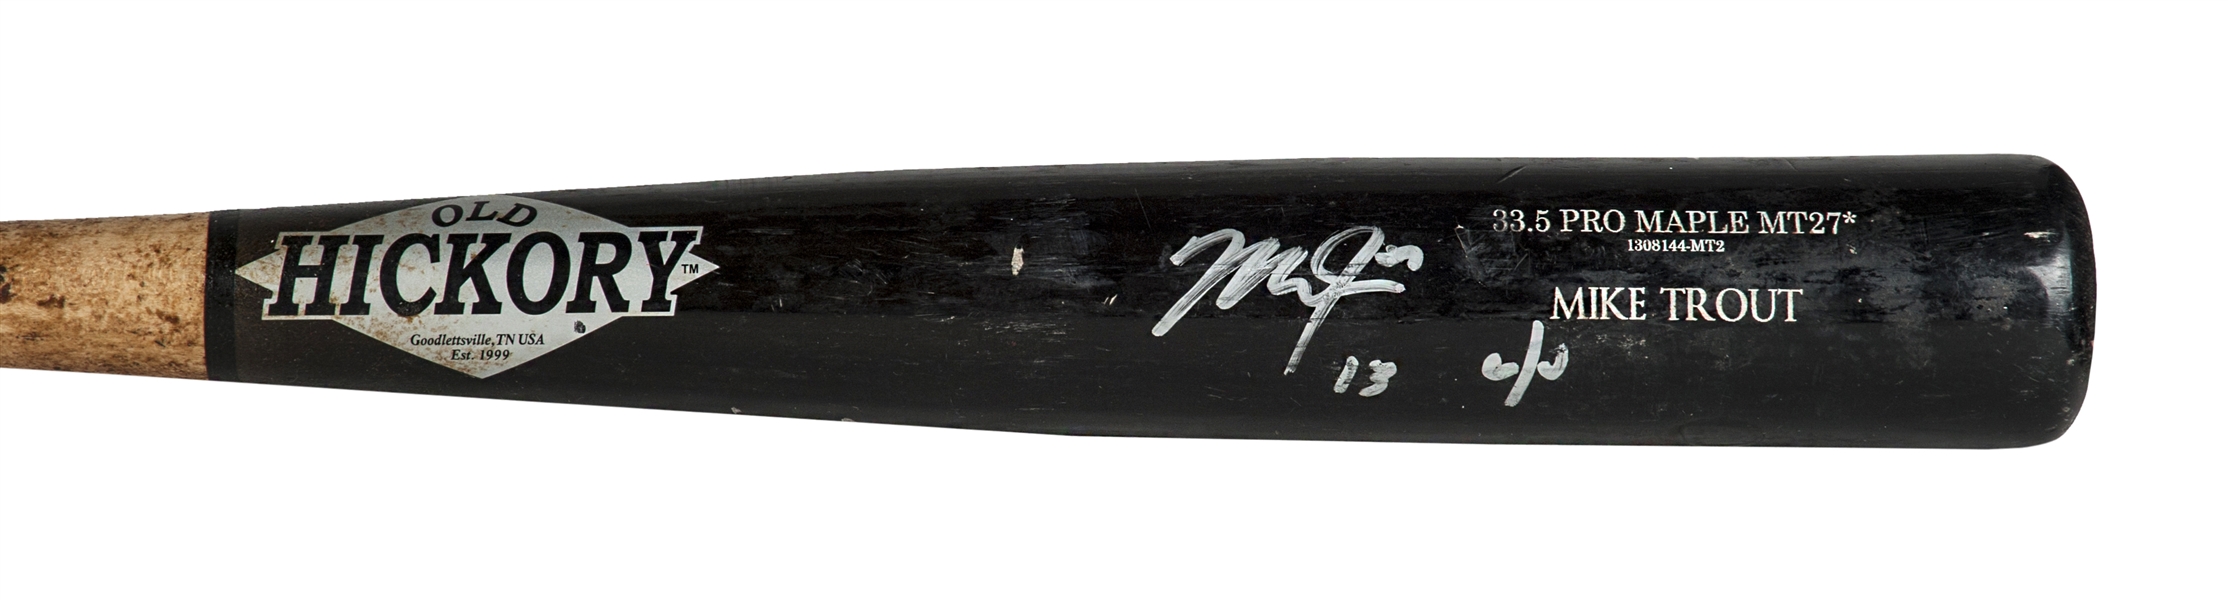 Mike Trout Signed Old Hickory Pro Maple MT27 Game-Used Baseball